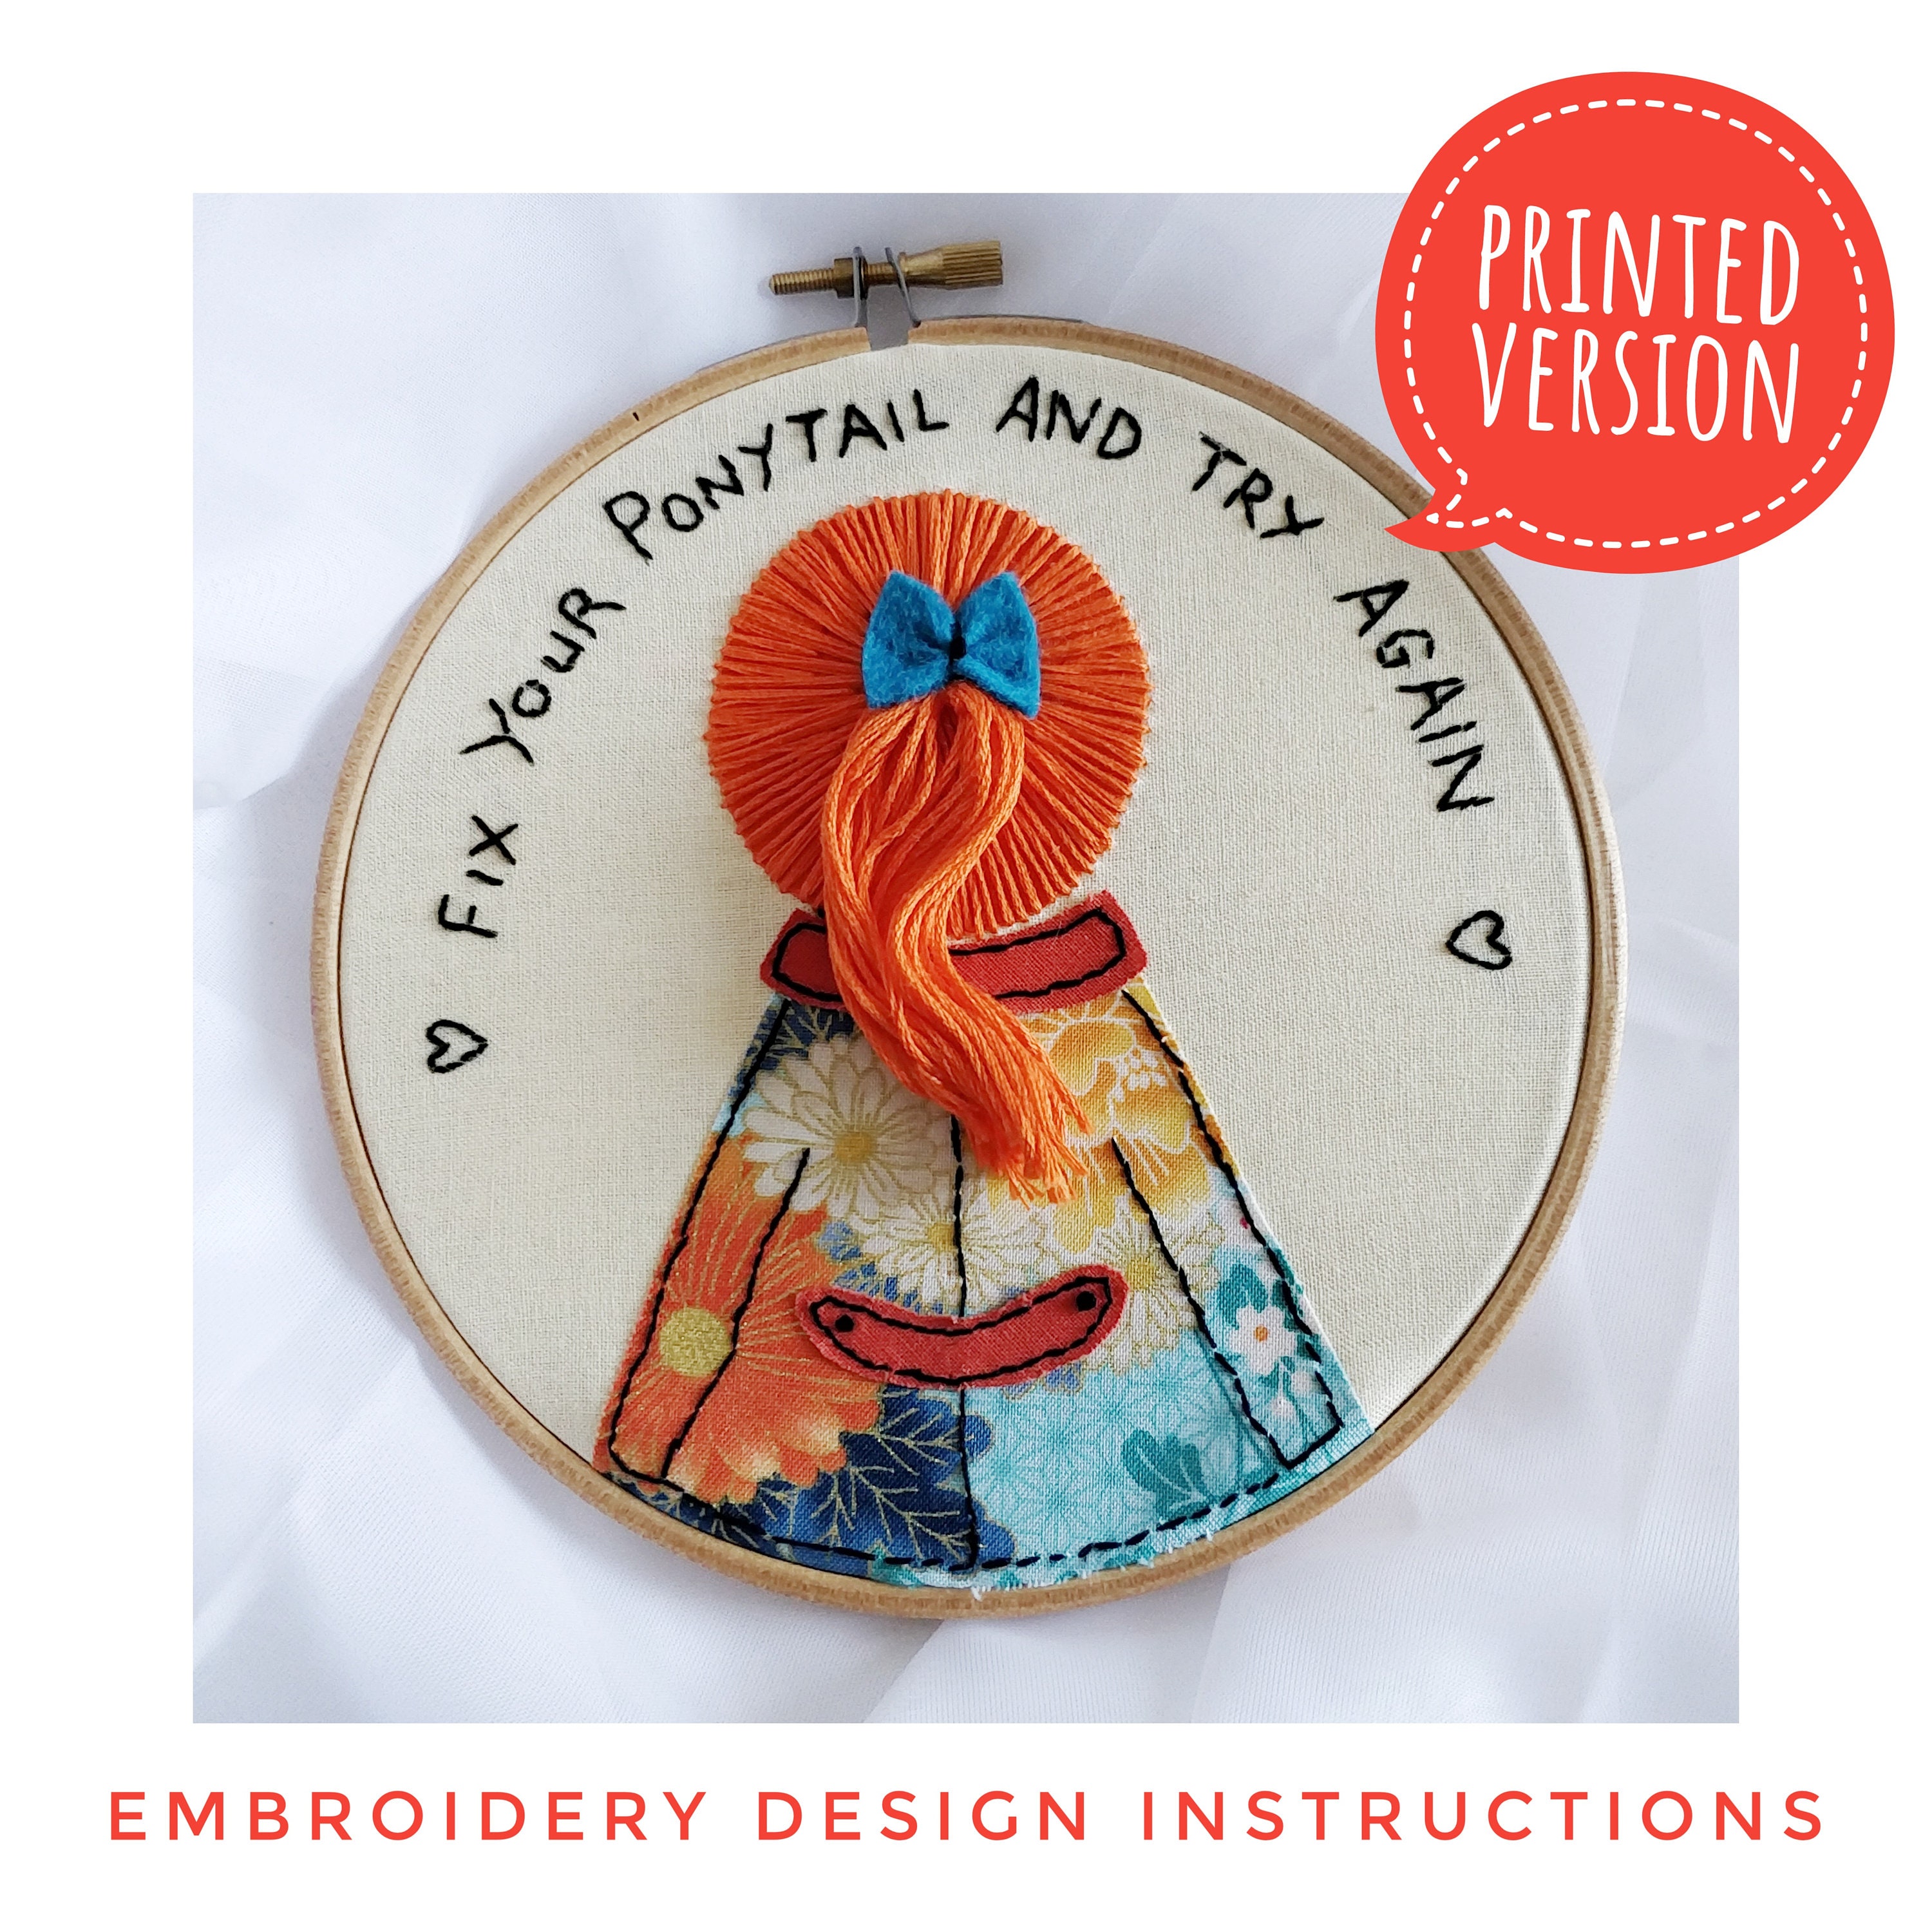 Floral Embroidery Kit for Beginners, DIY Kits for Adults, Floral